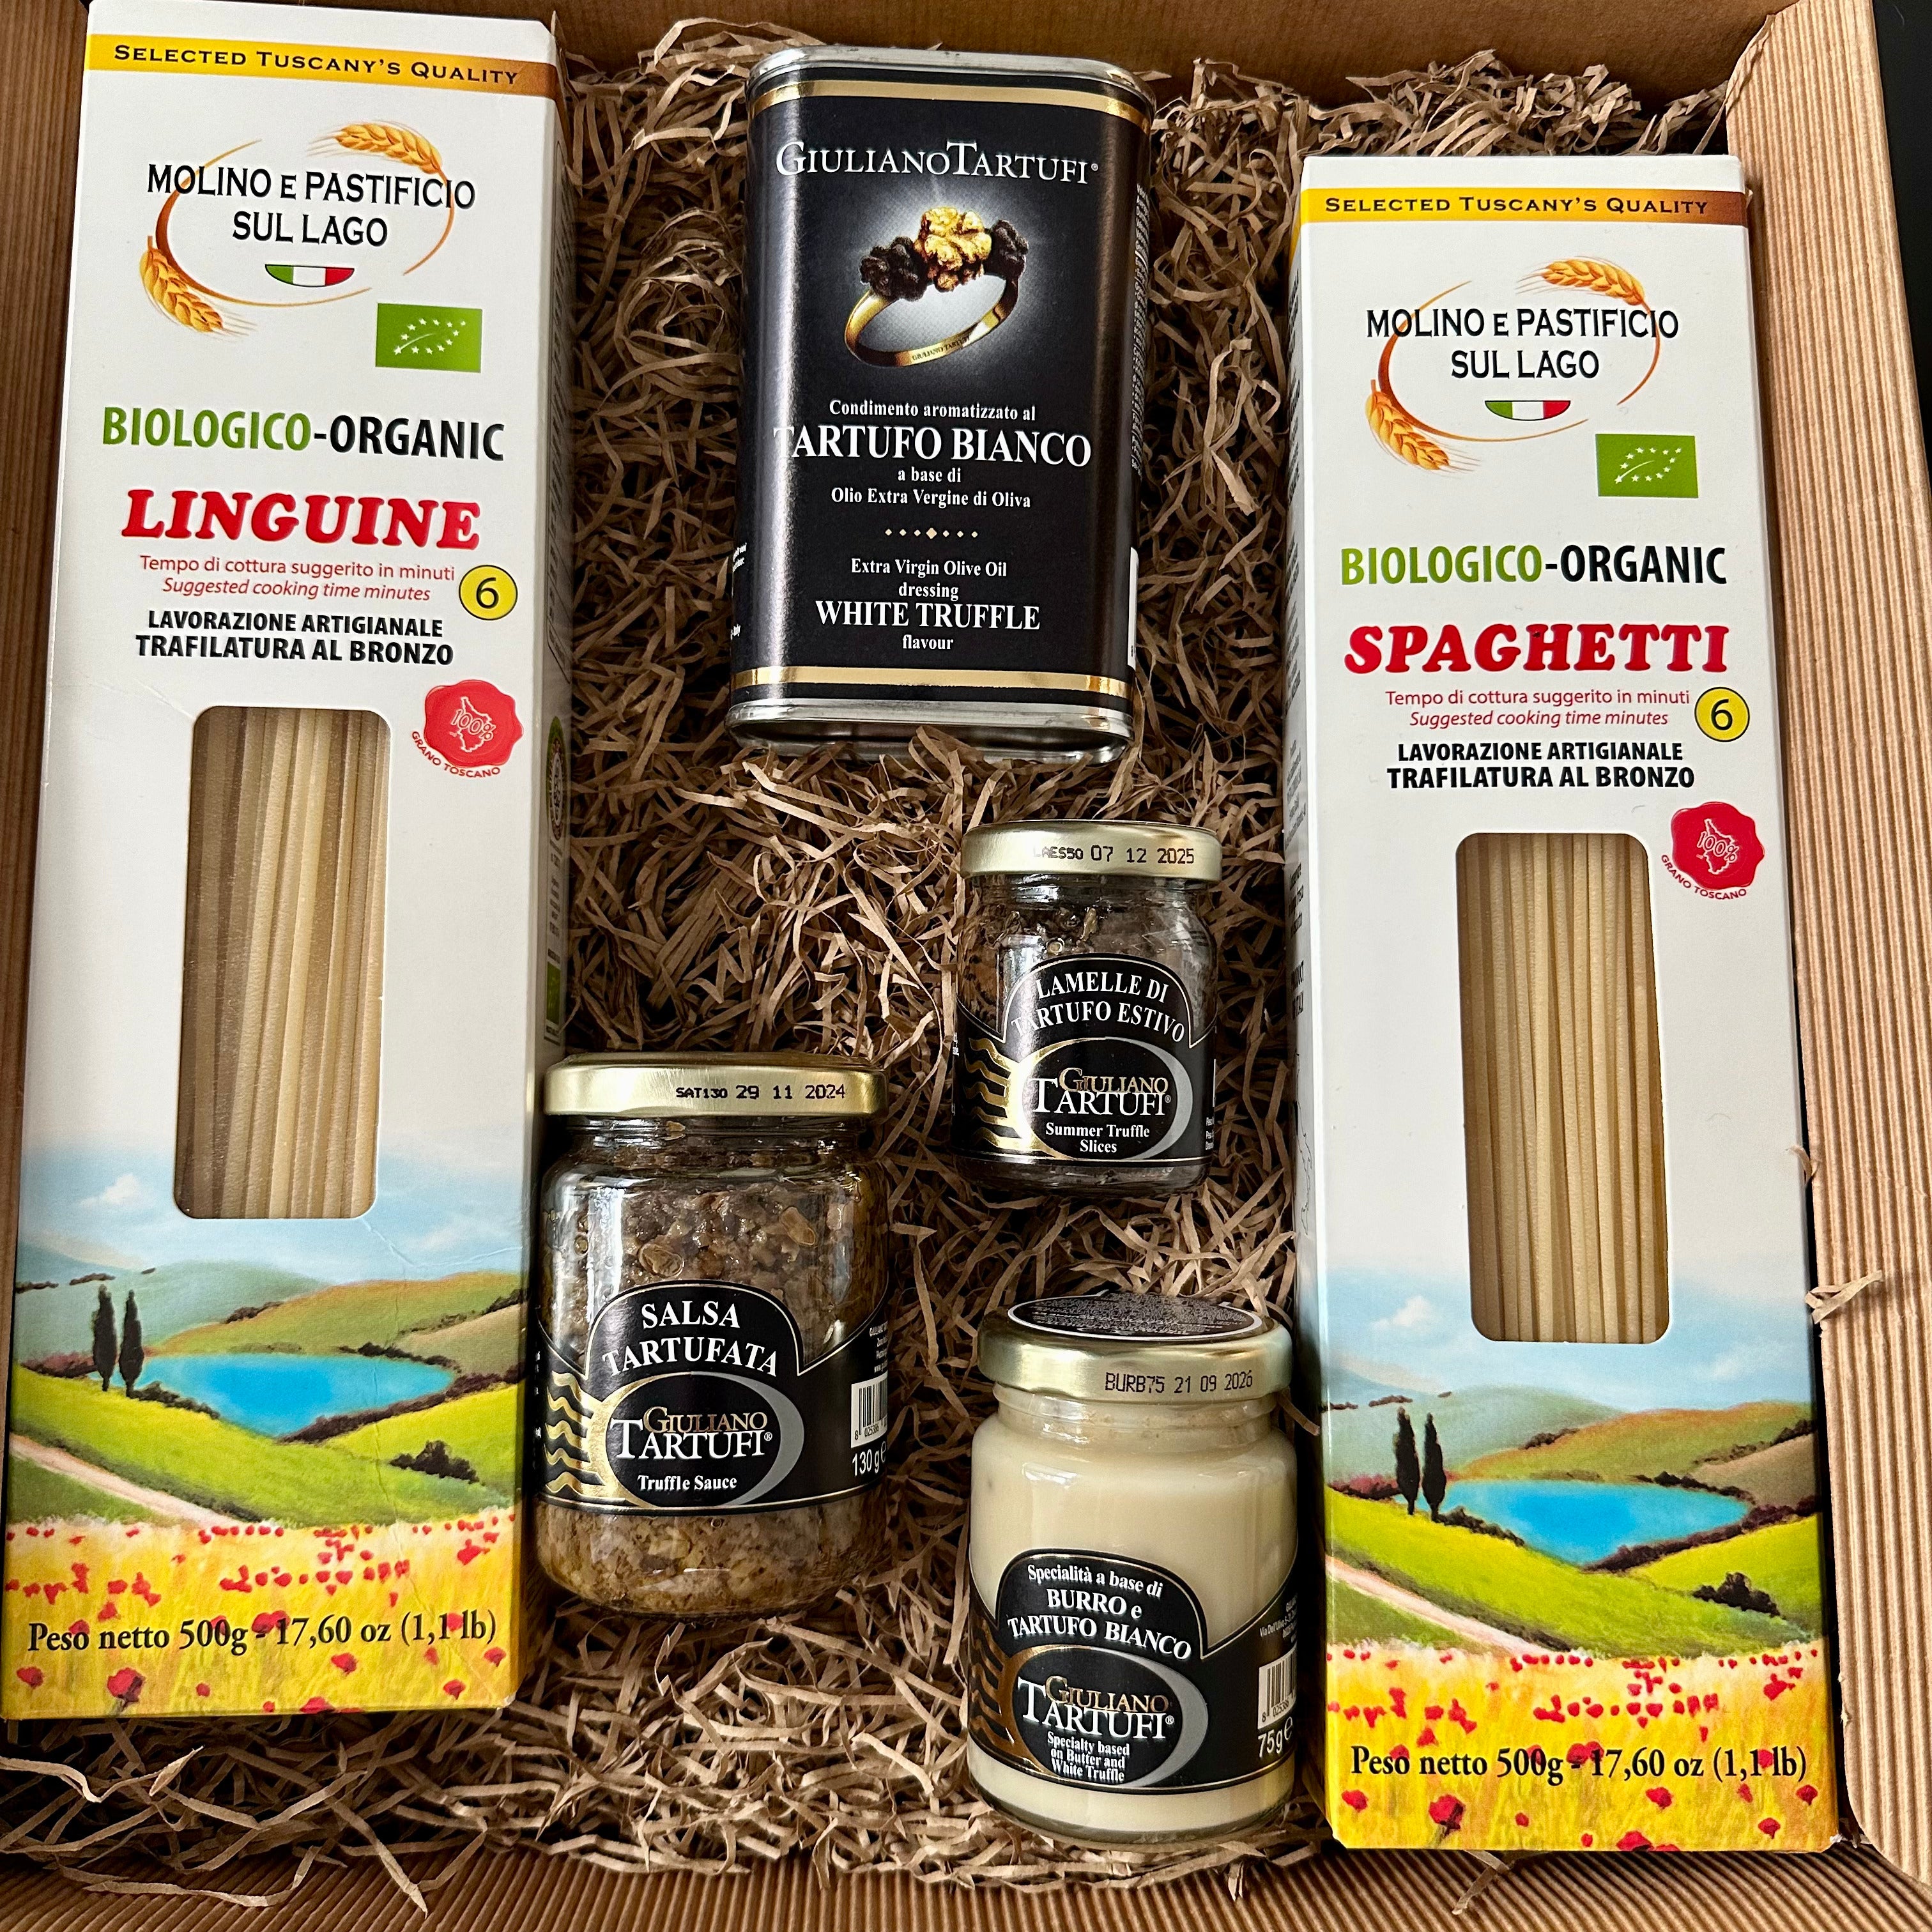 Pasta with Truffle [Top Selection]